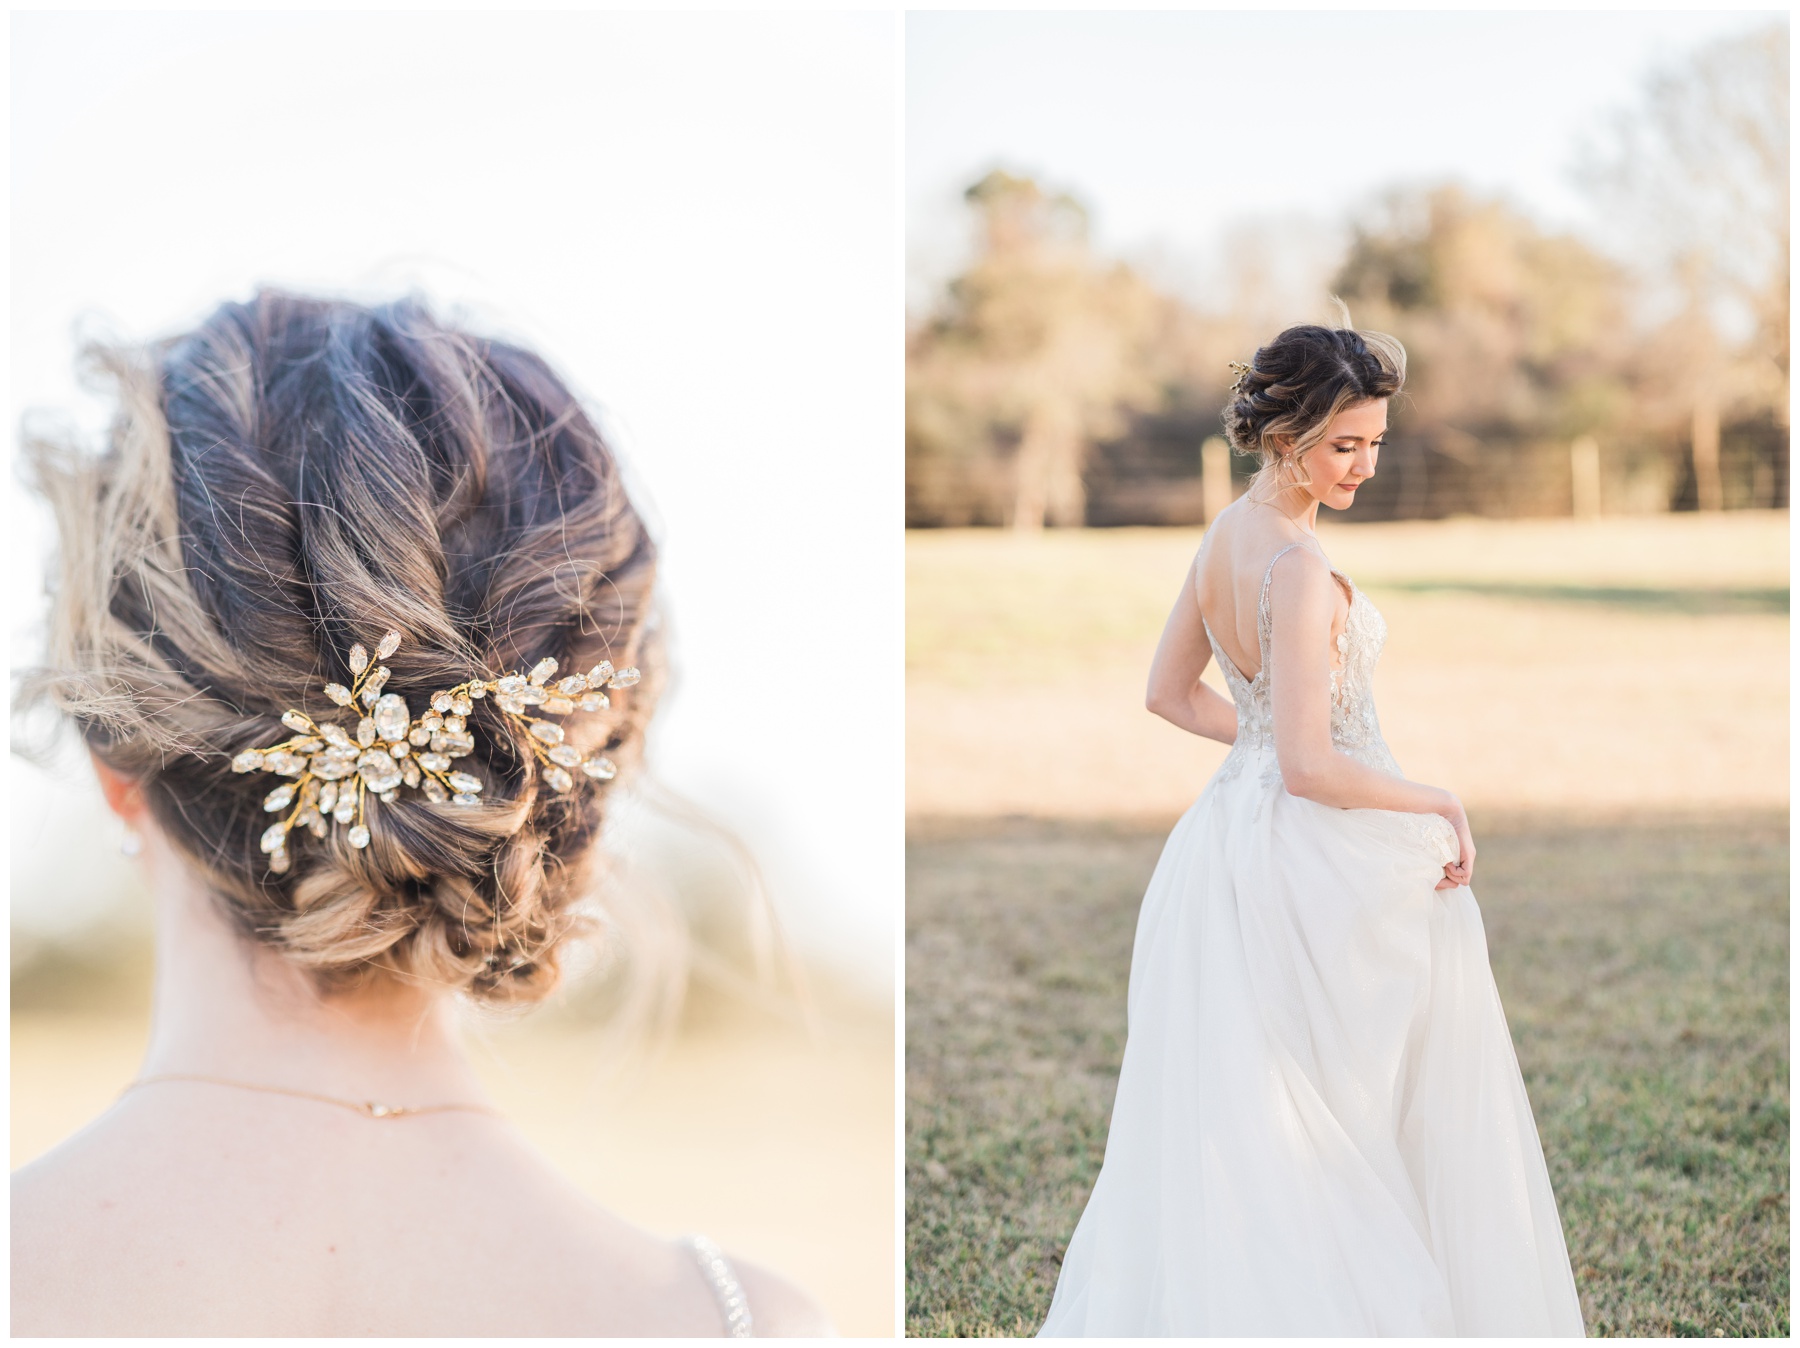 Bridal session at golden hour at Willowynn Barn